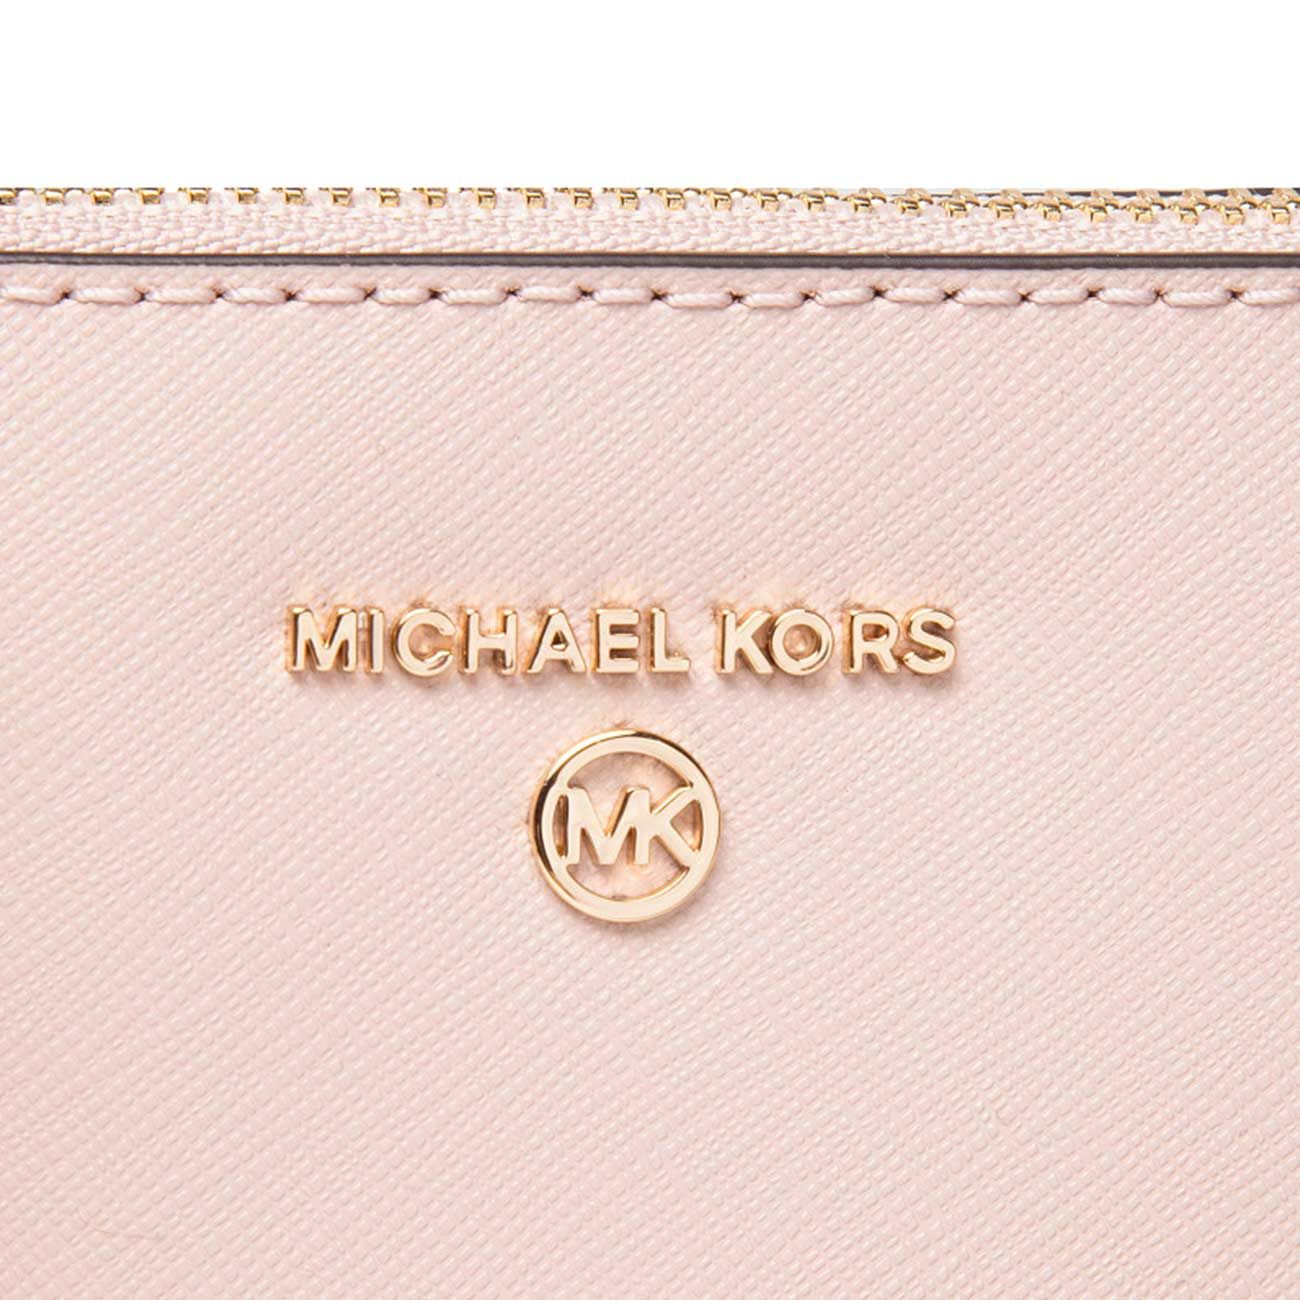 Michael Kors Jet Set Travel Large Saffiano Leather Crossbody Bag in Fawn